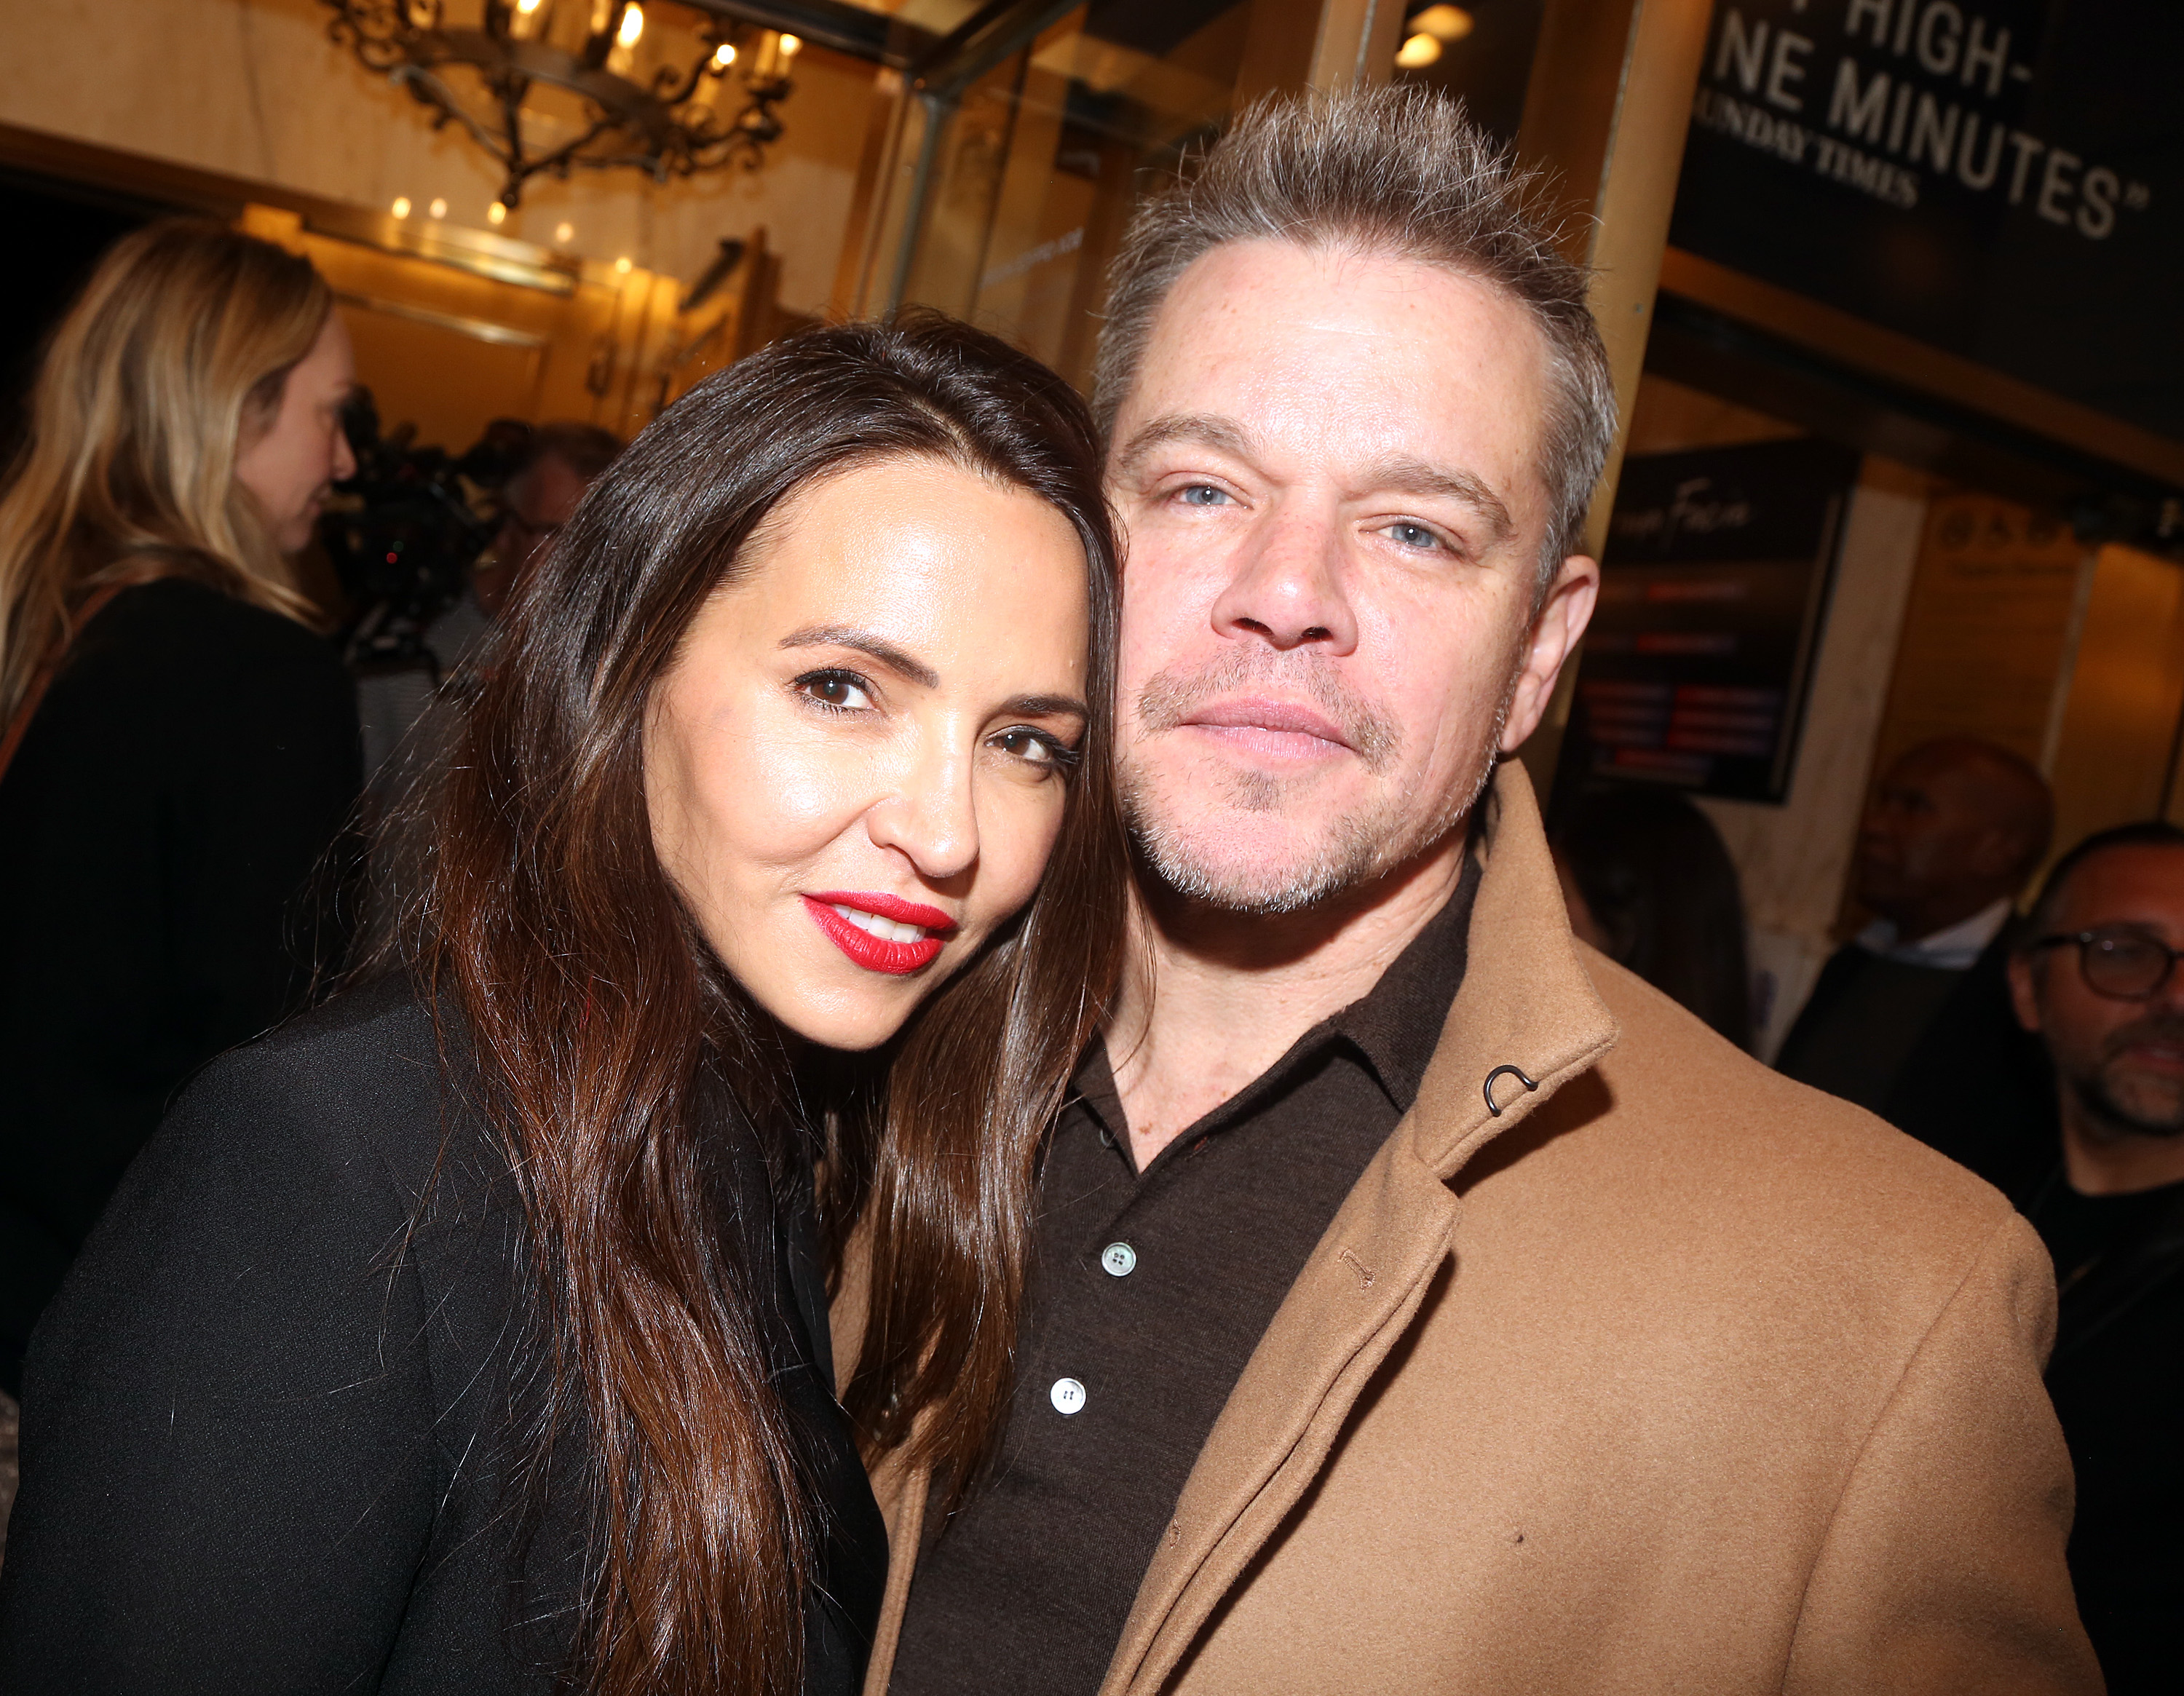 Luciana Barroso Damon and Matt Damon pose at the opening night of the play "Prima Facie" on Broadway at The Golden Theatre on April 23, 2023 in New York City. | Source: Getty Images